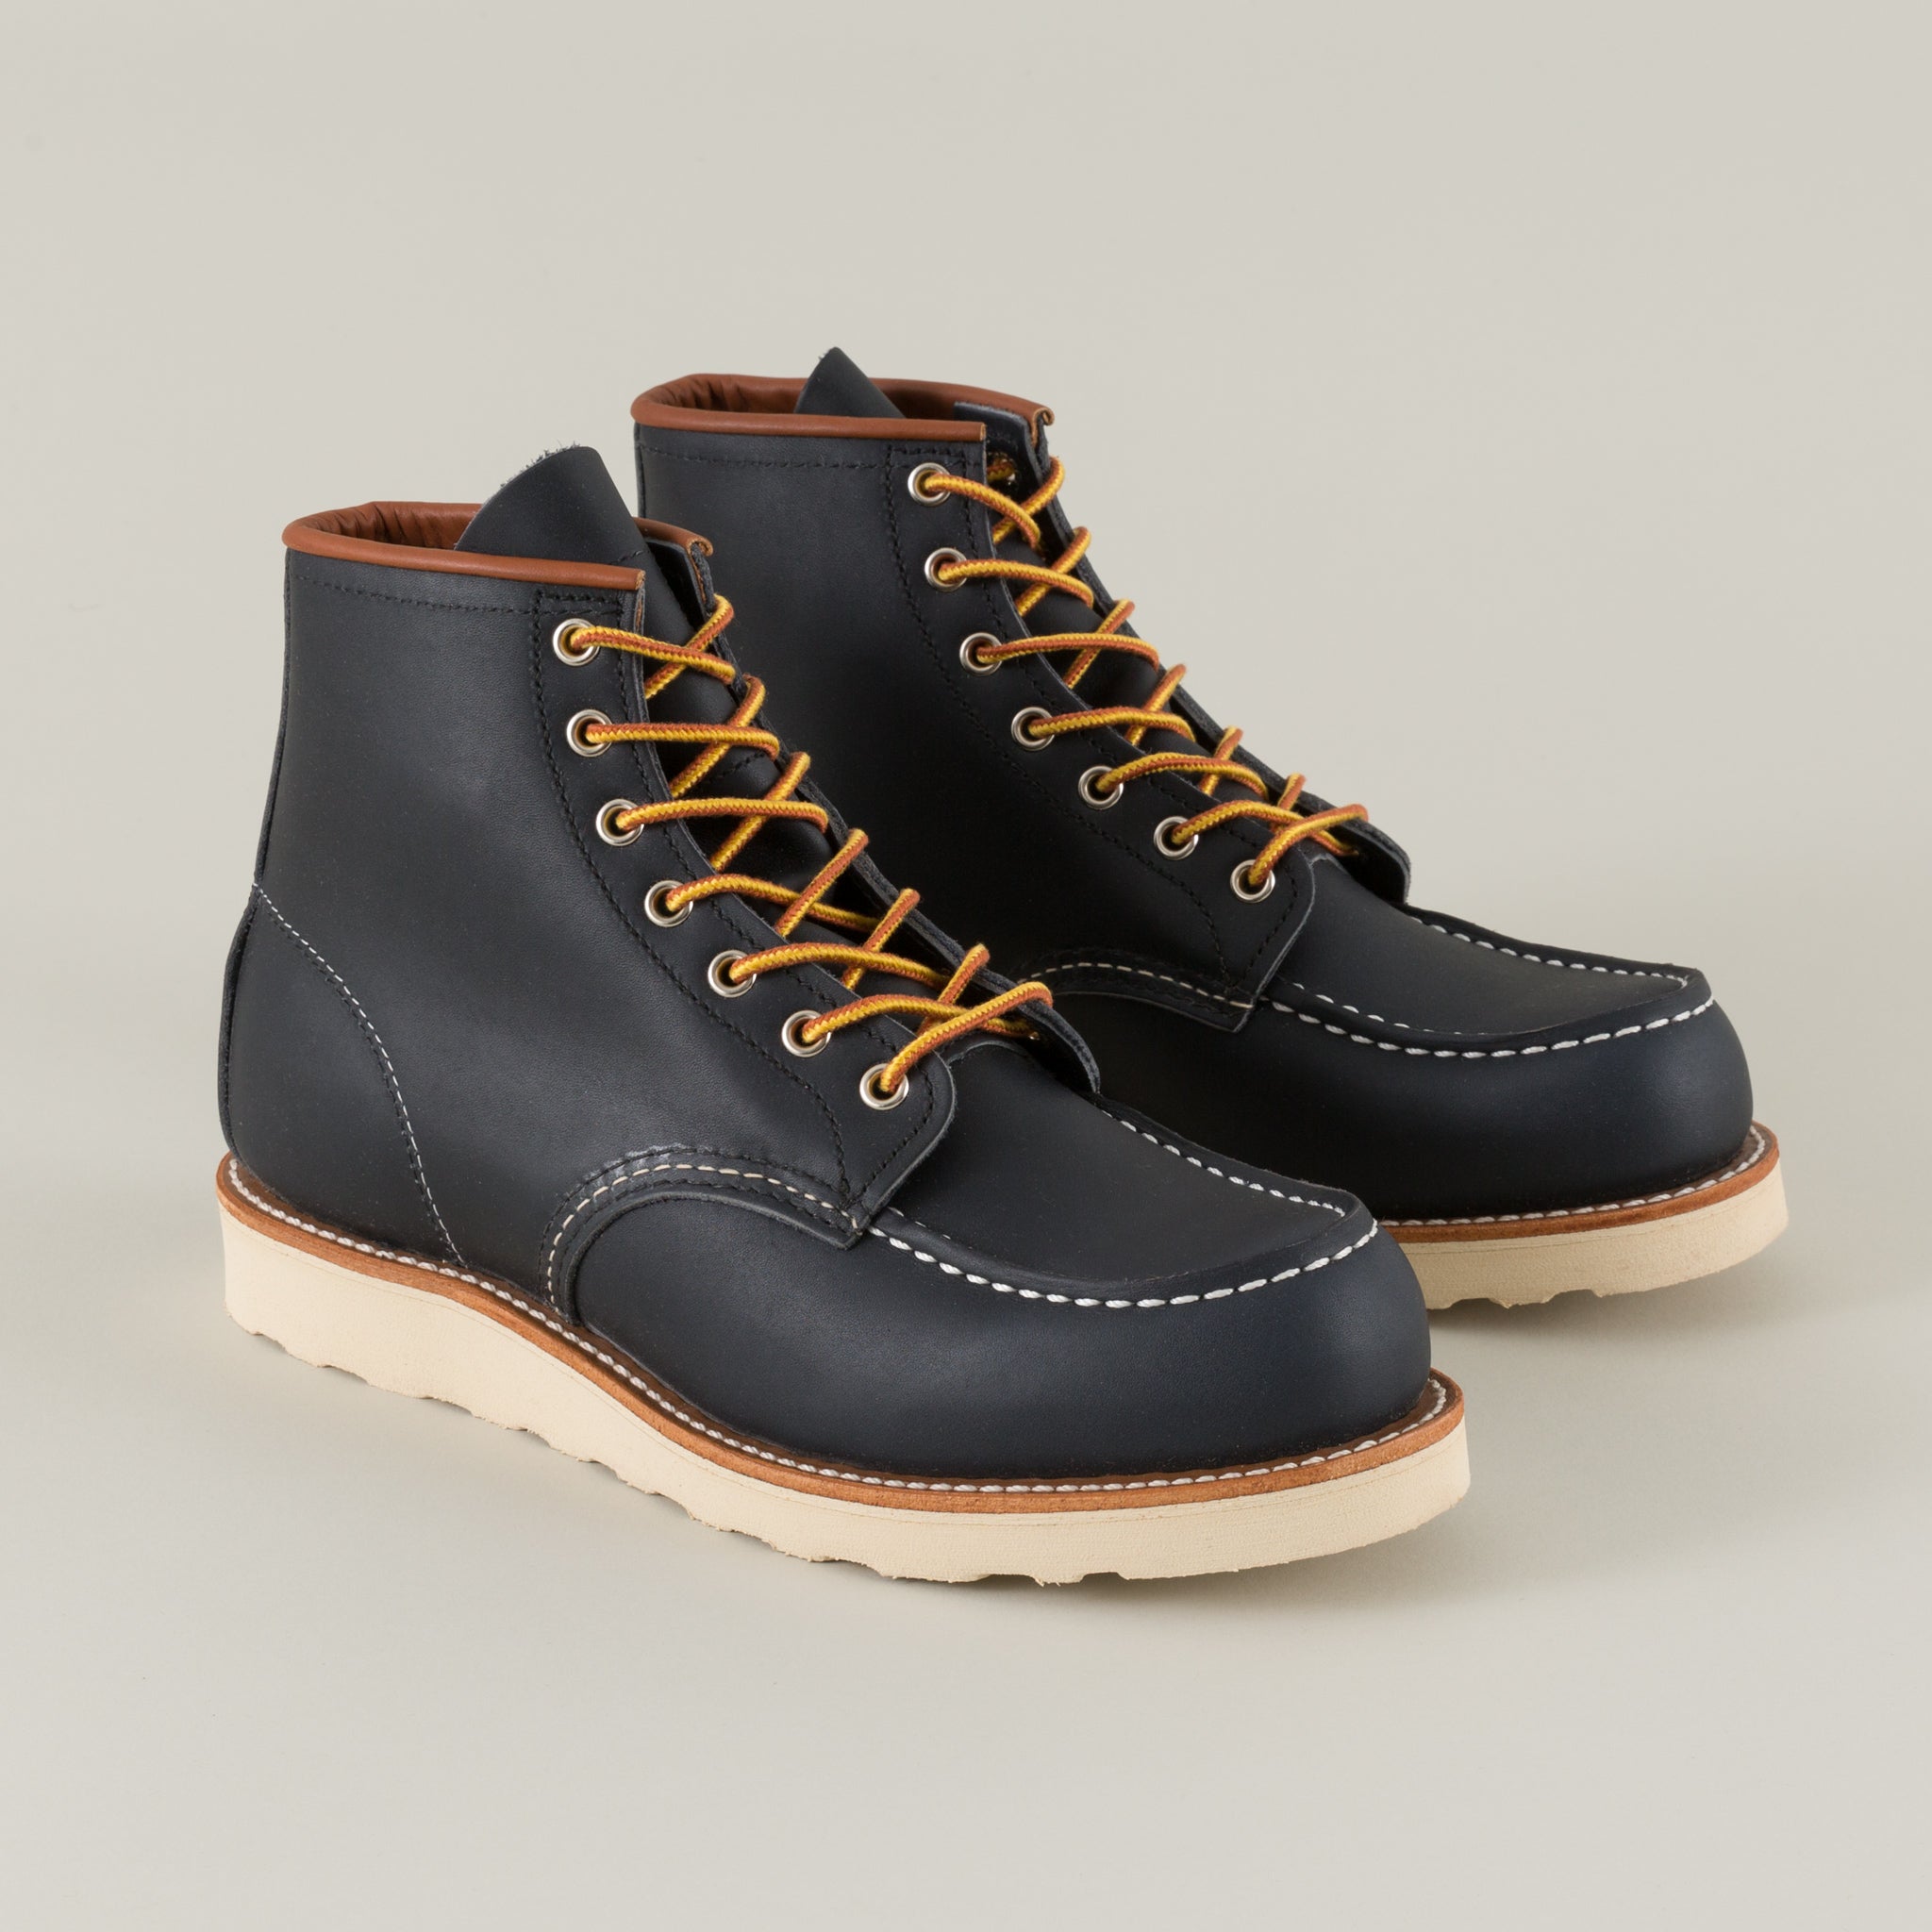 red wing beckman moc toe